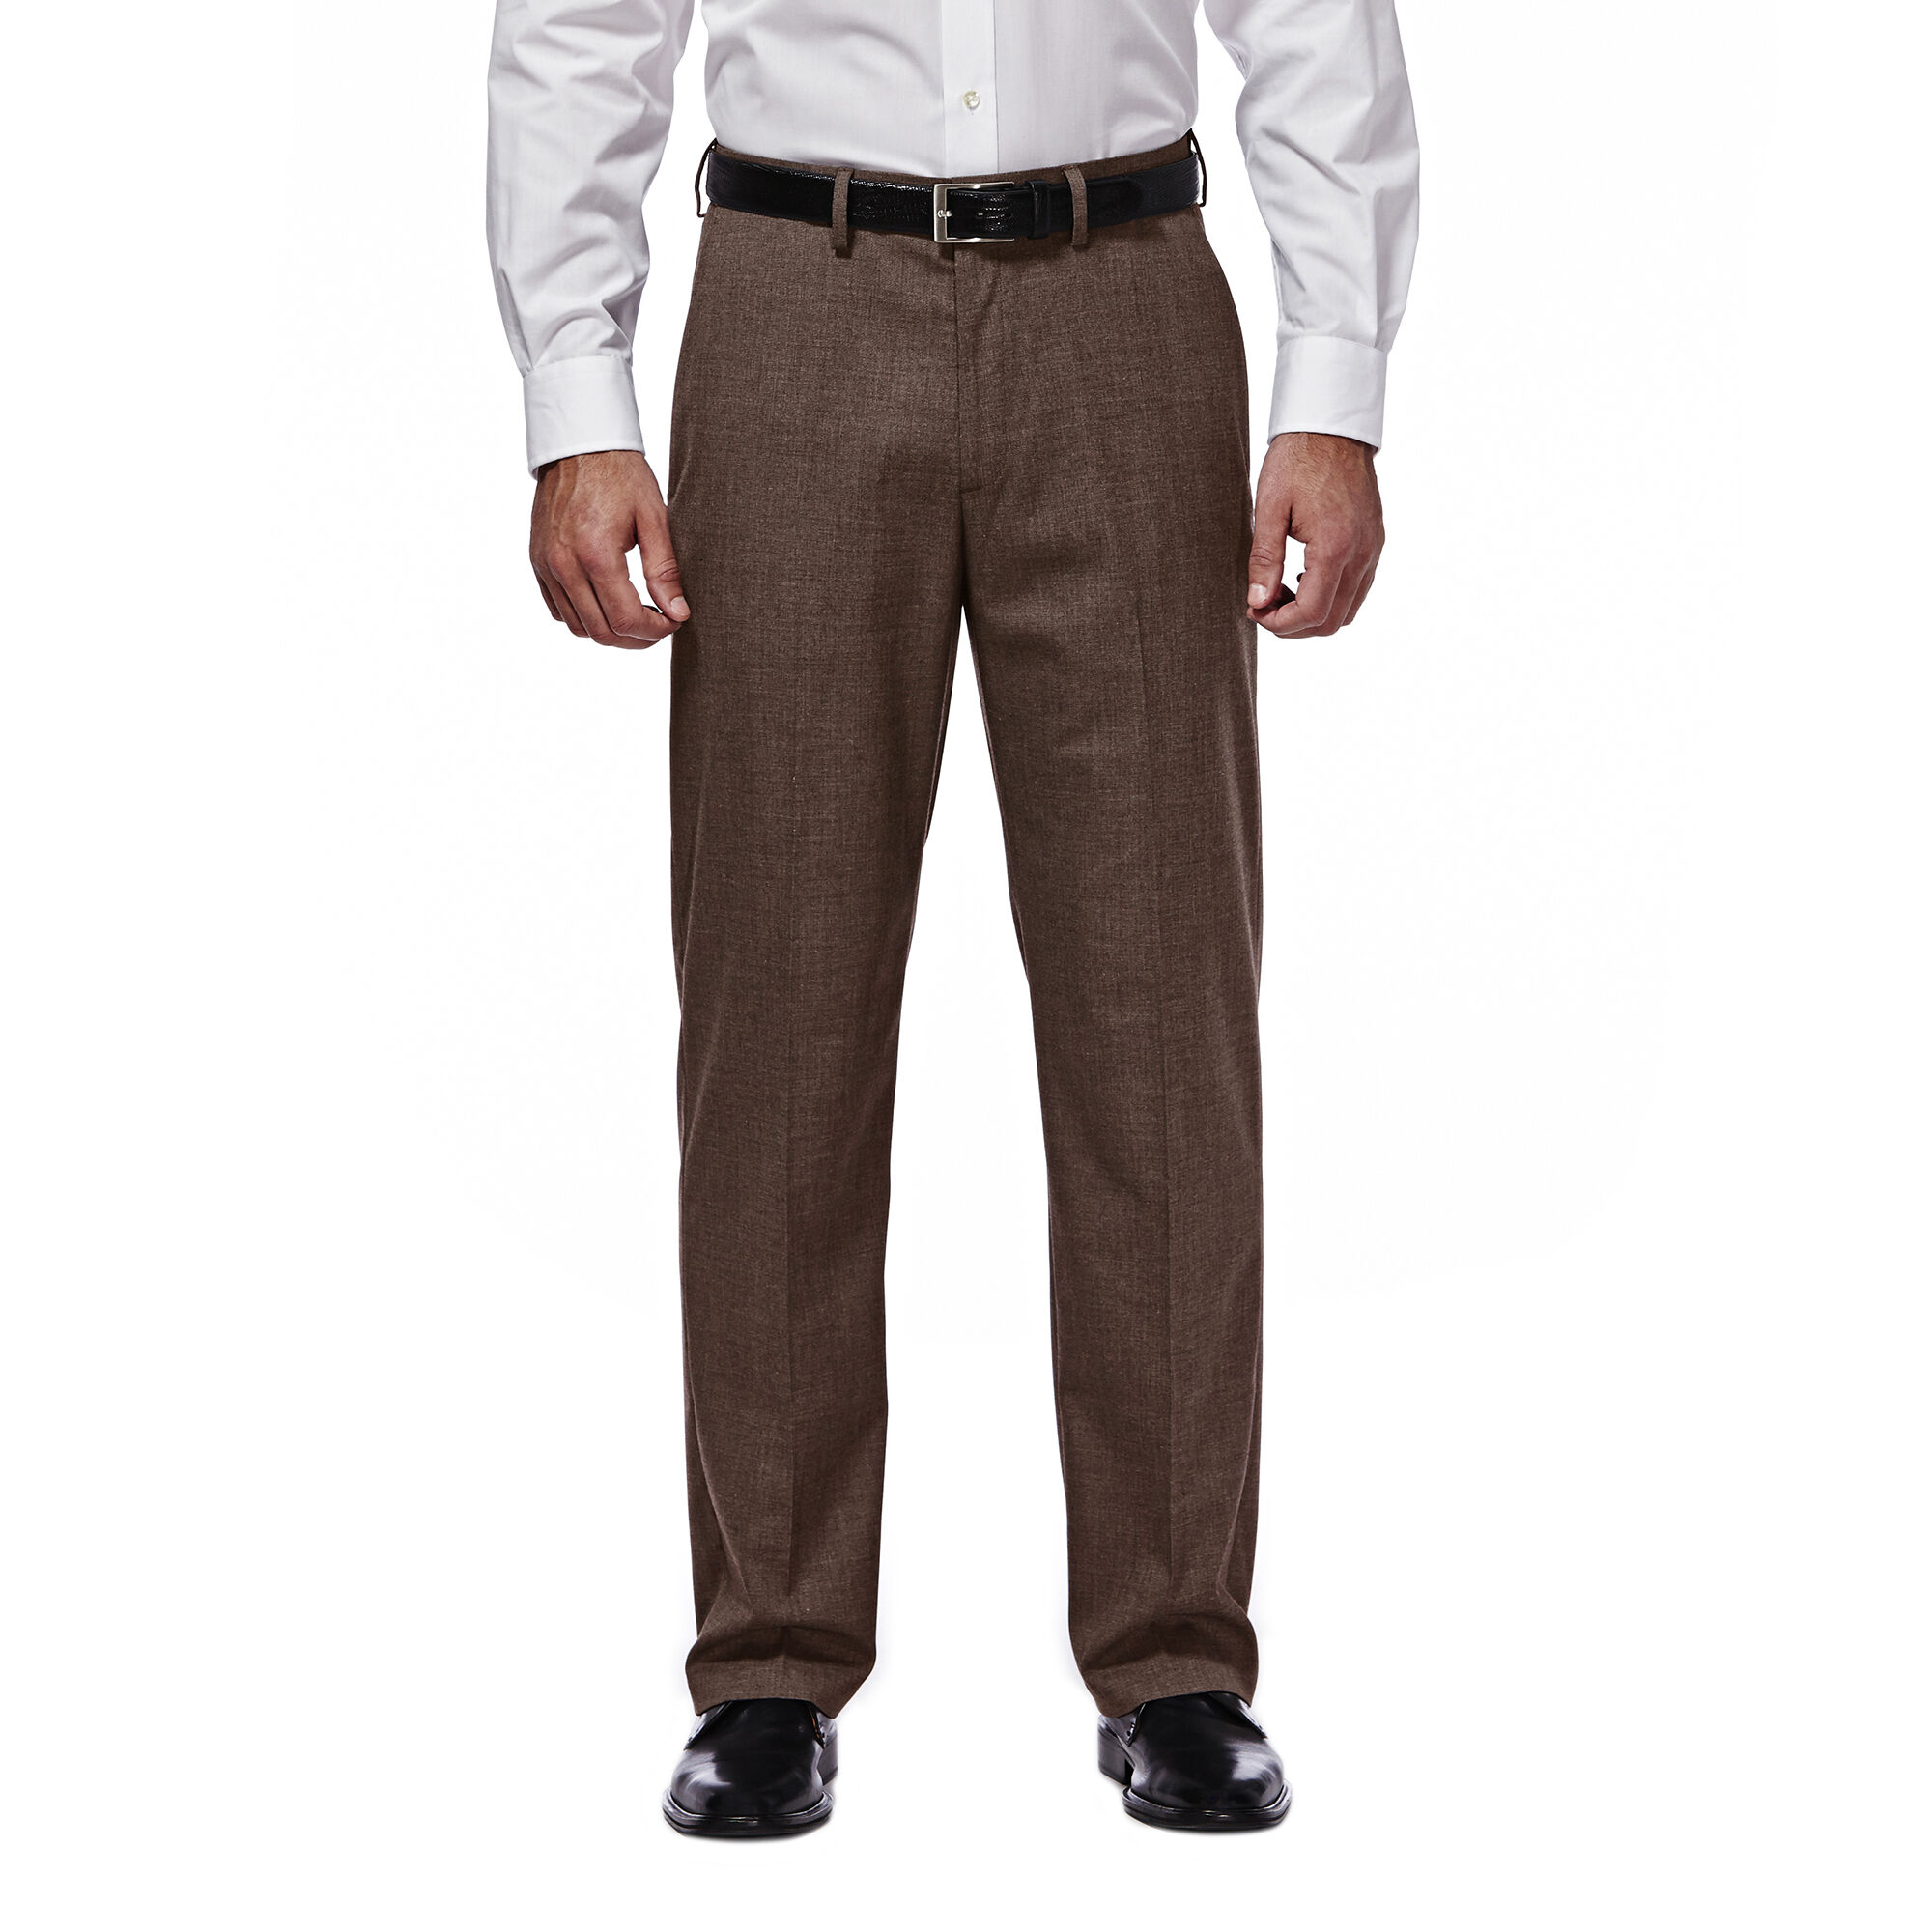 J.M. Haggar Premium Stretch Suit Pant - Flat Front Chocolate (HY00182 Clothing Pants) photo